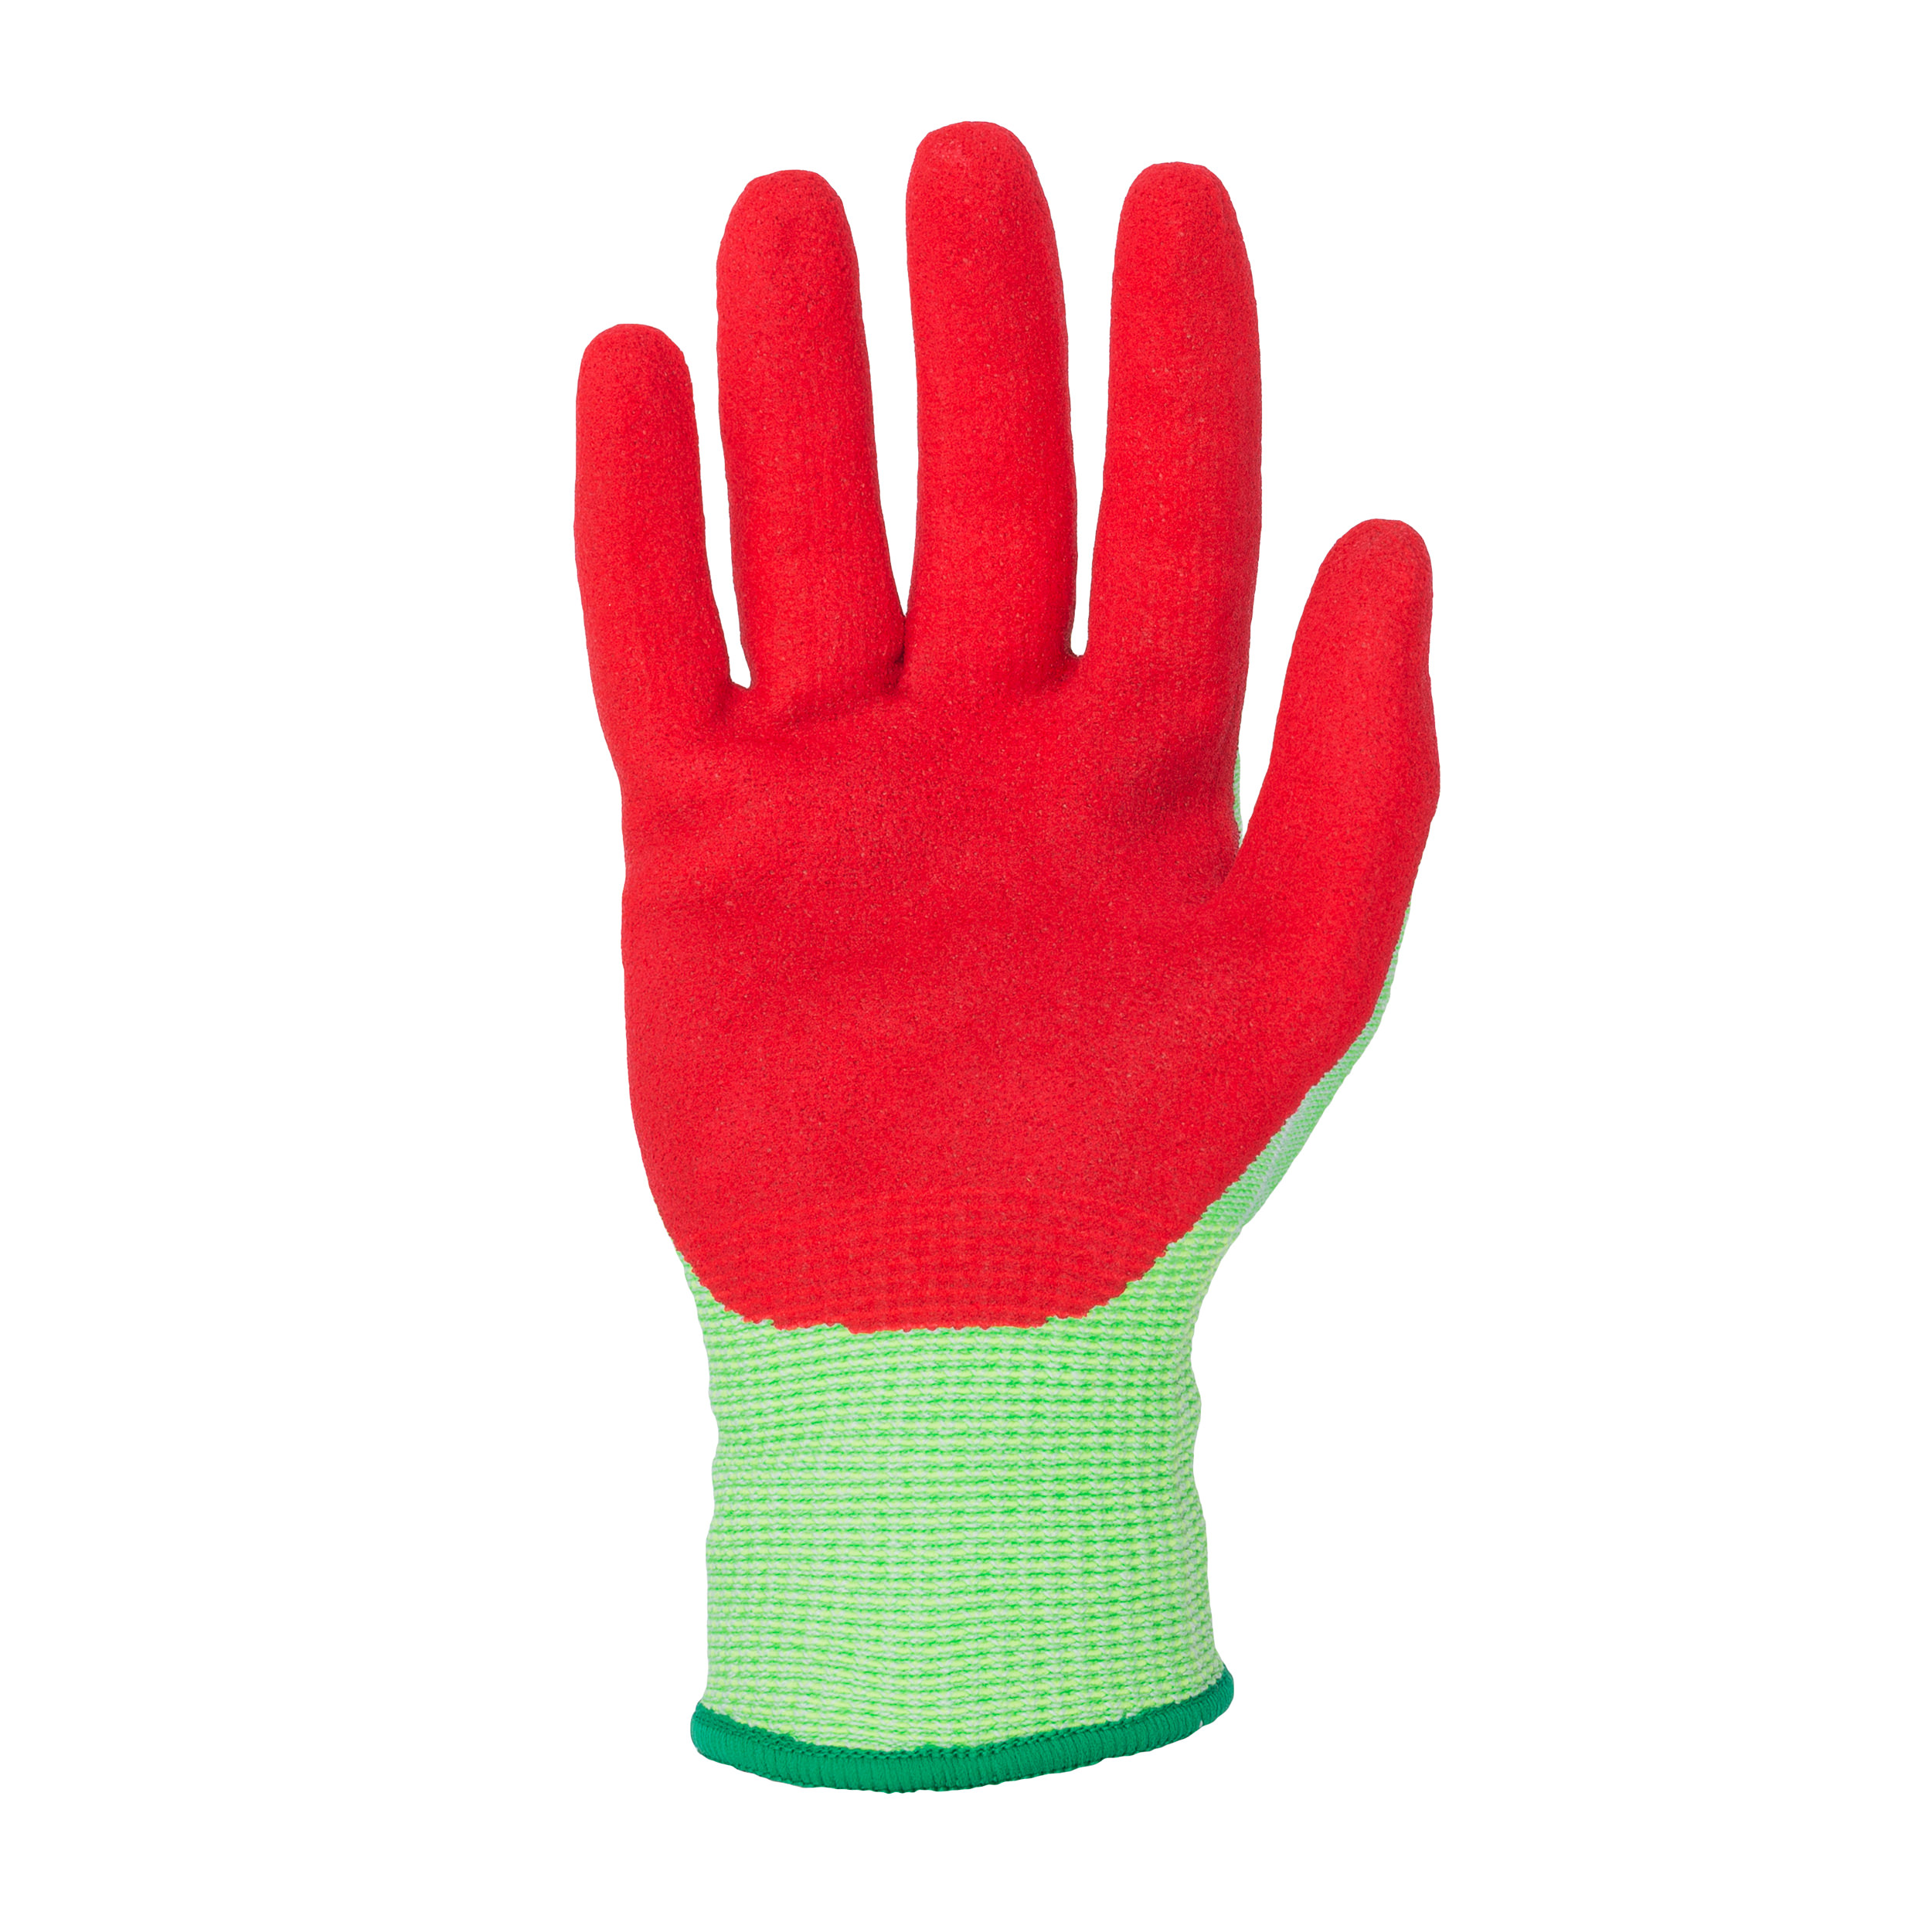 Palm Coated Cotton Hand Gloves - Rubber